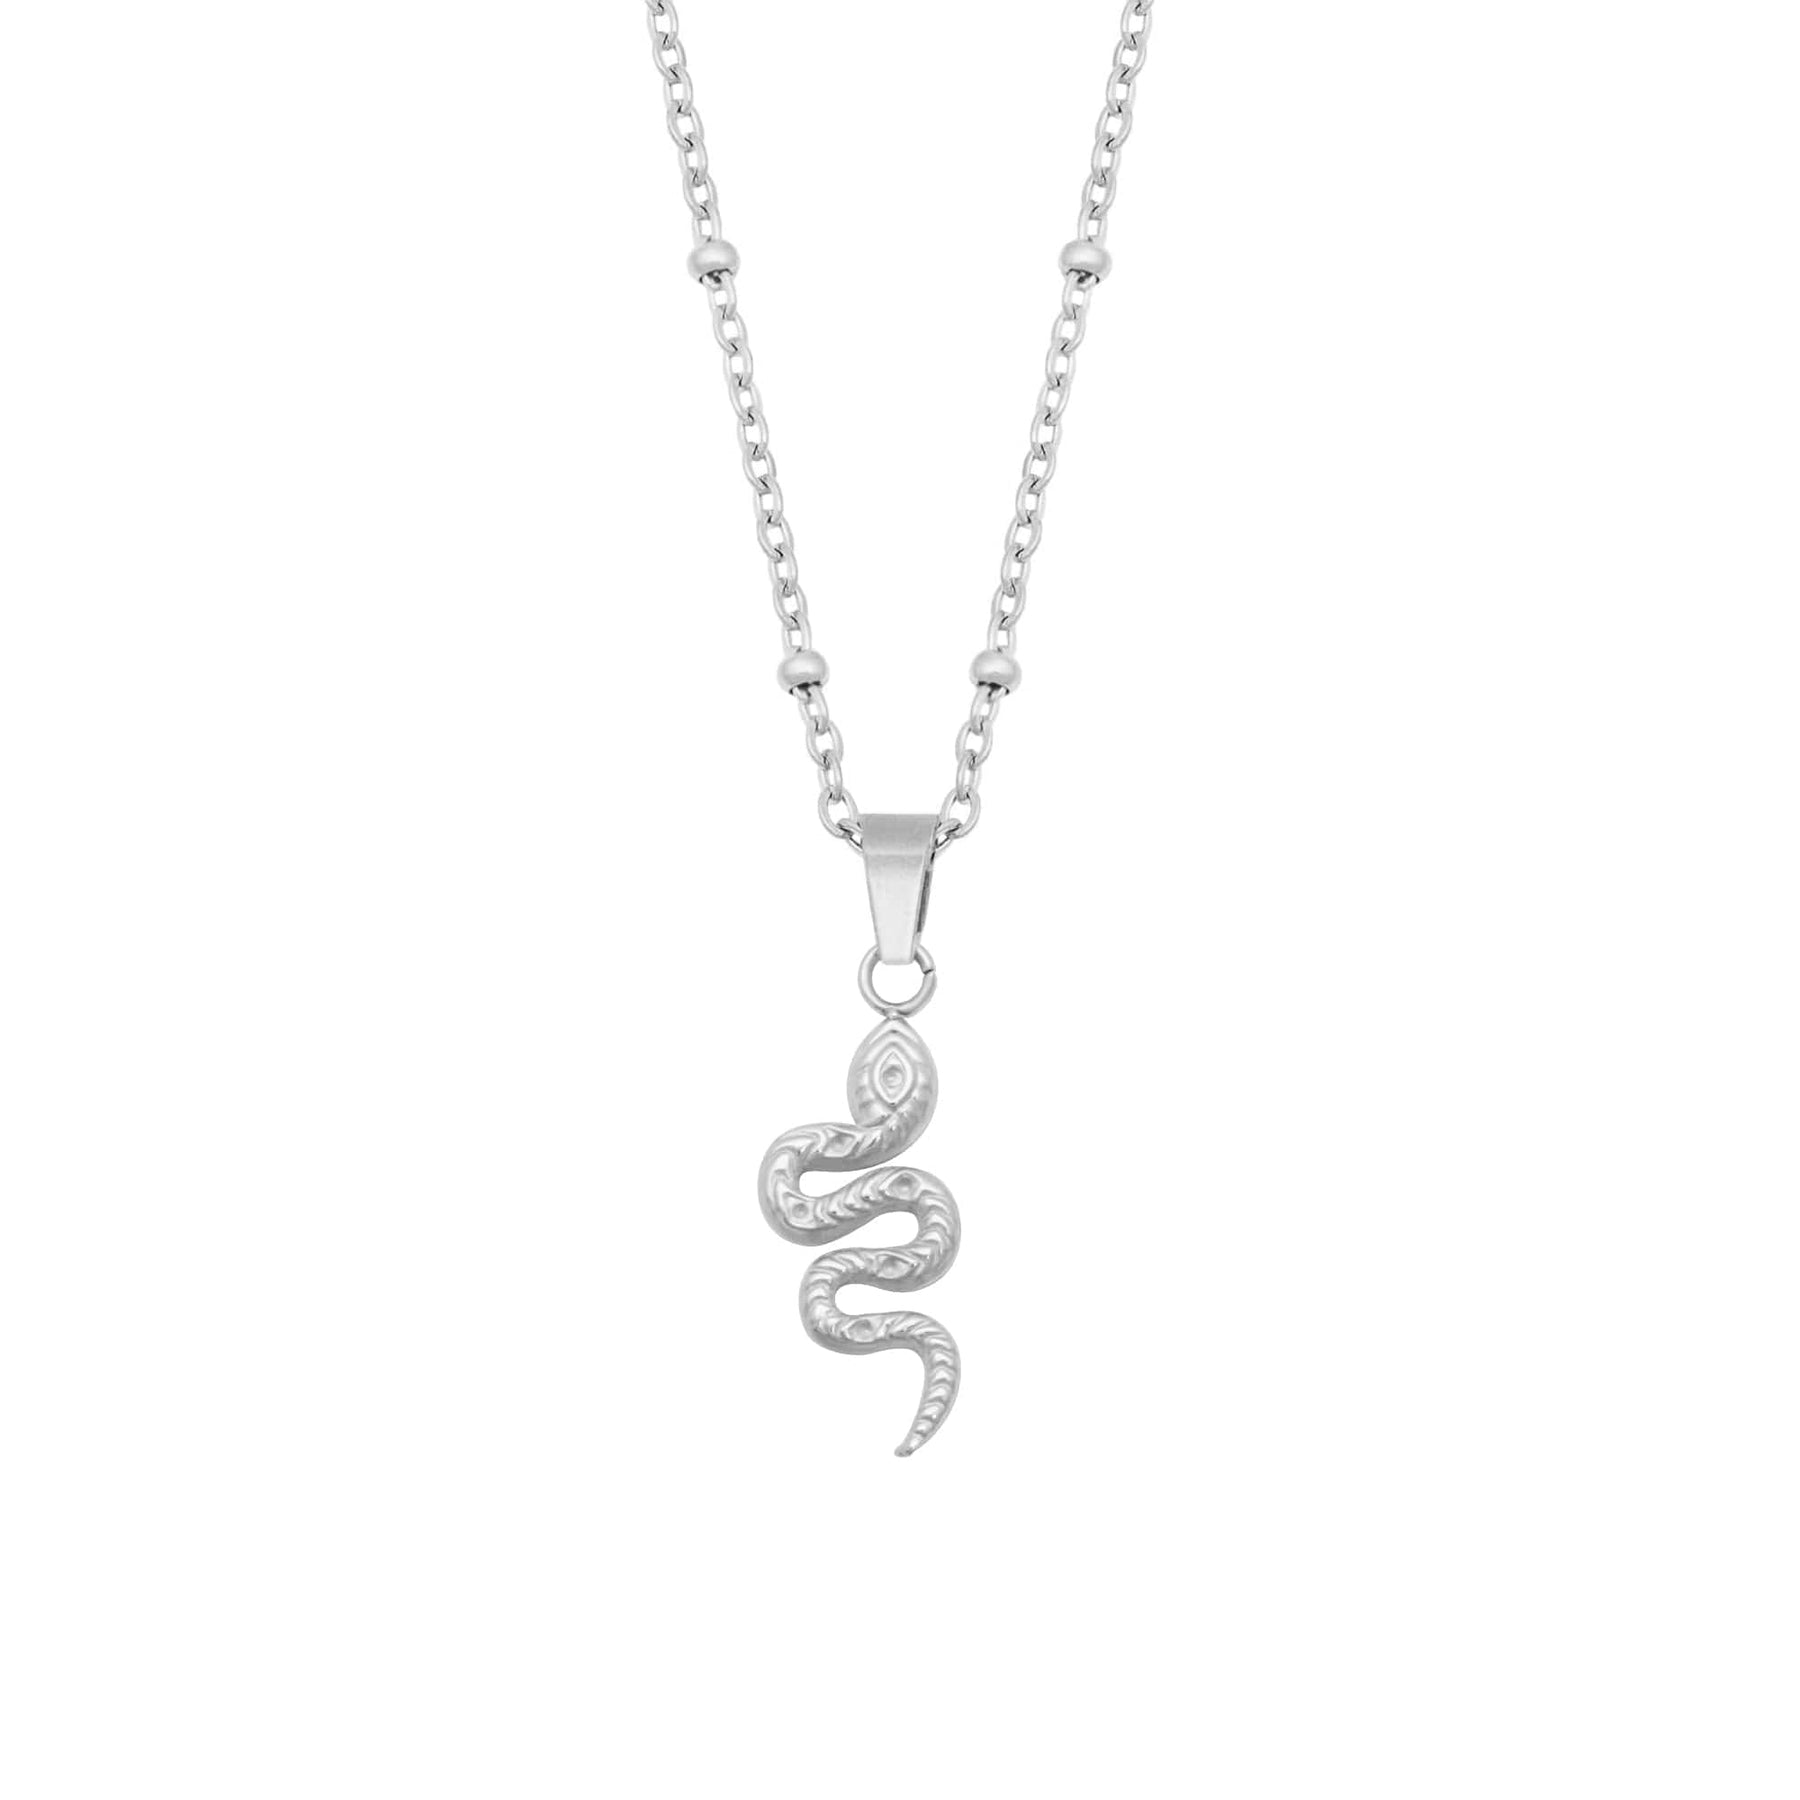 BohoMoon Stainless Steel Cobra Snake Necklace Silver